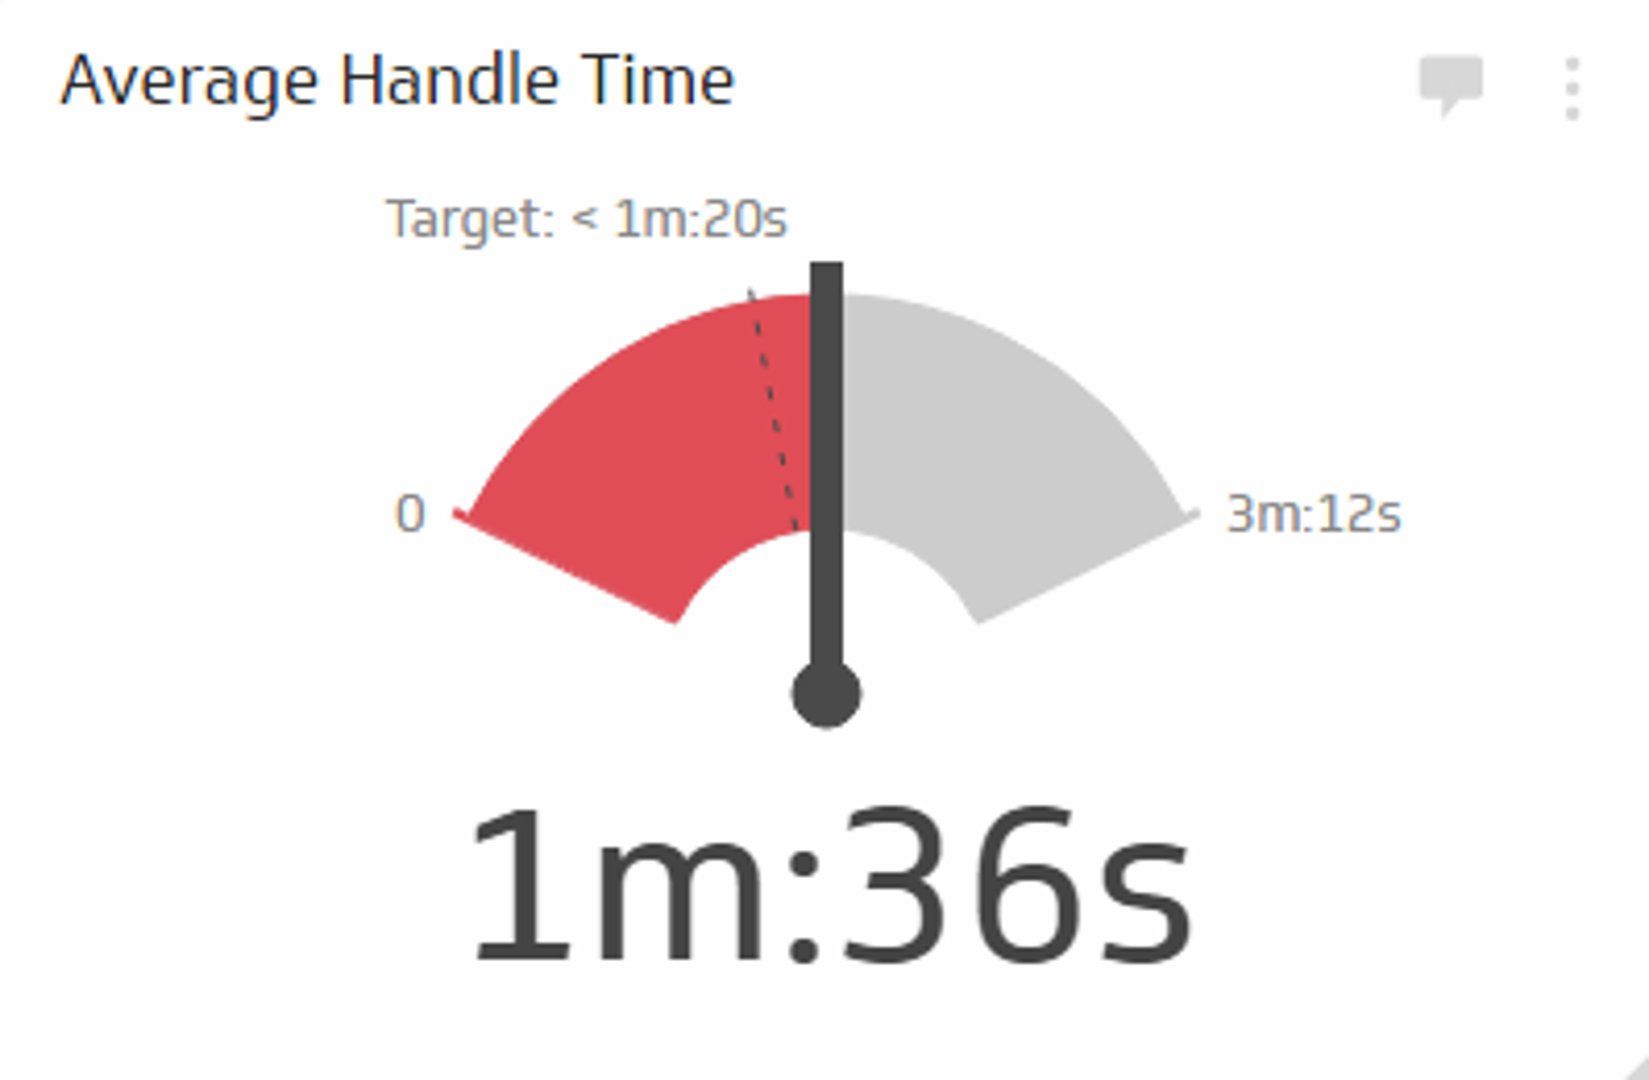 Call Center KPI Examples - Average Handle Time Metric